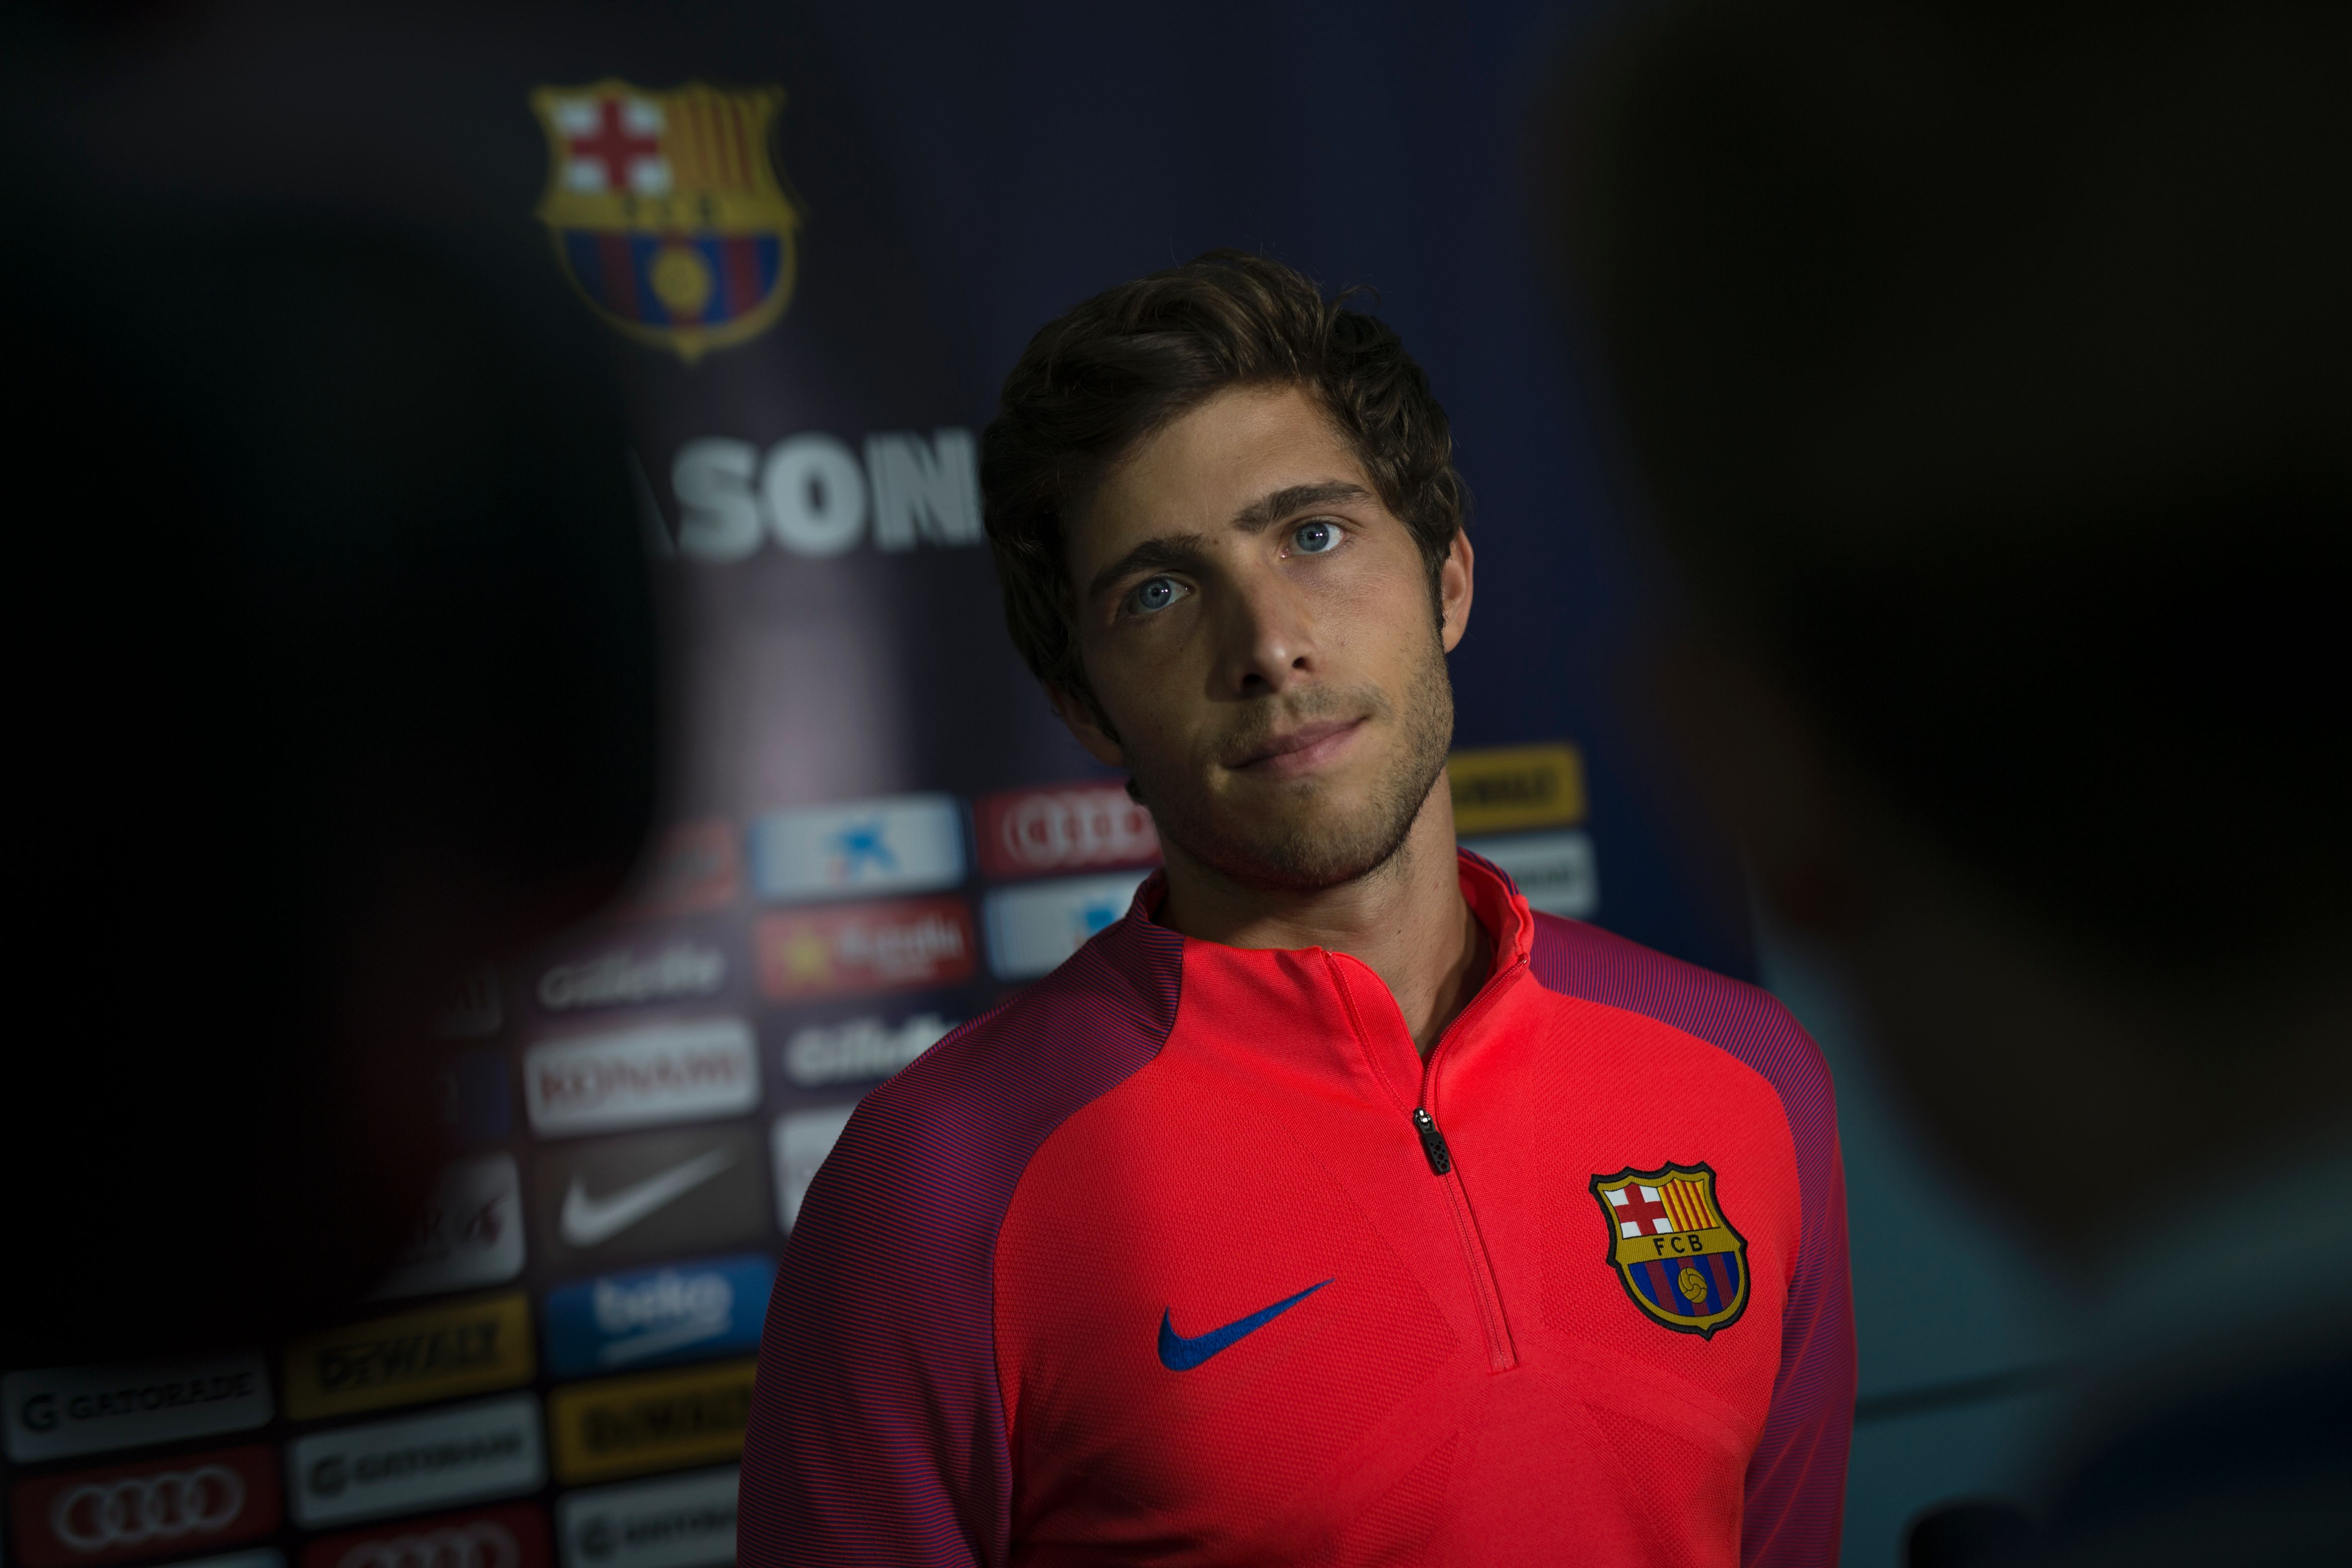 Barcelona's Spanish midfielder Sergi Roberto is interviewed by members of the media following a team training session at St George's Park near Burton-on-Trent, central England, on July 29, 2016.
The Spanish champions conducted a five-day training camp at the English Football Association's national football centre ahead of 2016 International Champions Cup fixtures against Celtic in Dublin on July 30 and and Liverpool at Wembley on August 6.  / AFP / OLI SCARFF        (Photo credit should read OLI SCARFF/AFP/Getty Images)